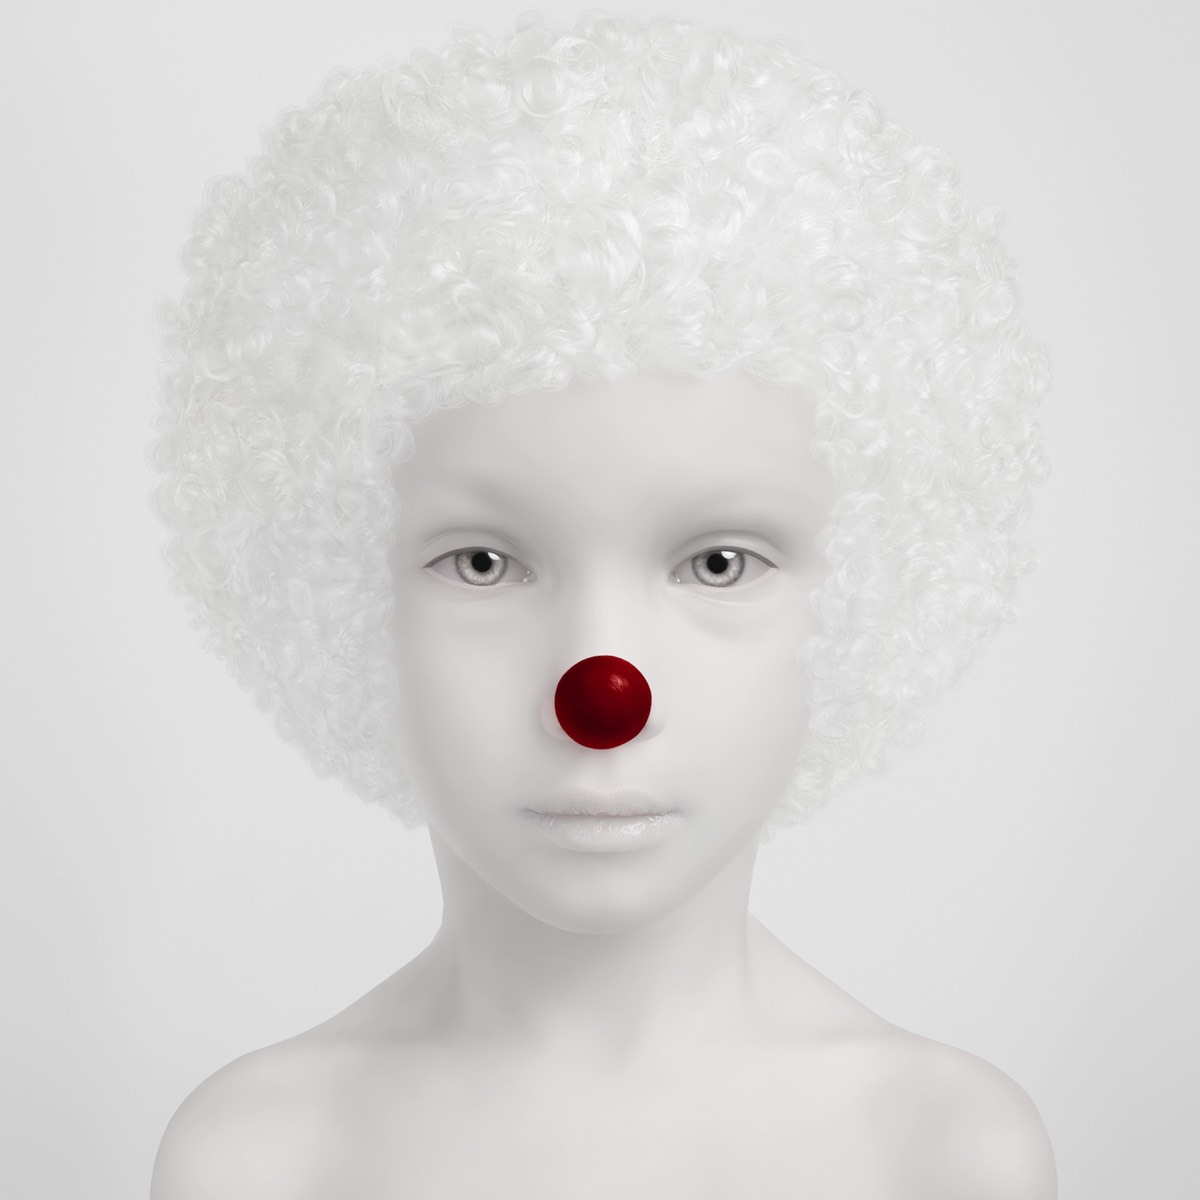 Gorgeous Surrealist Portraits With A Porcelain Style By Oleg Dou 7